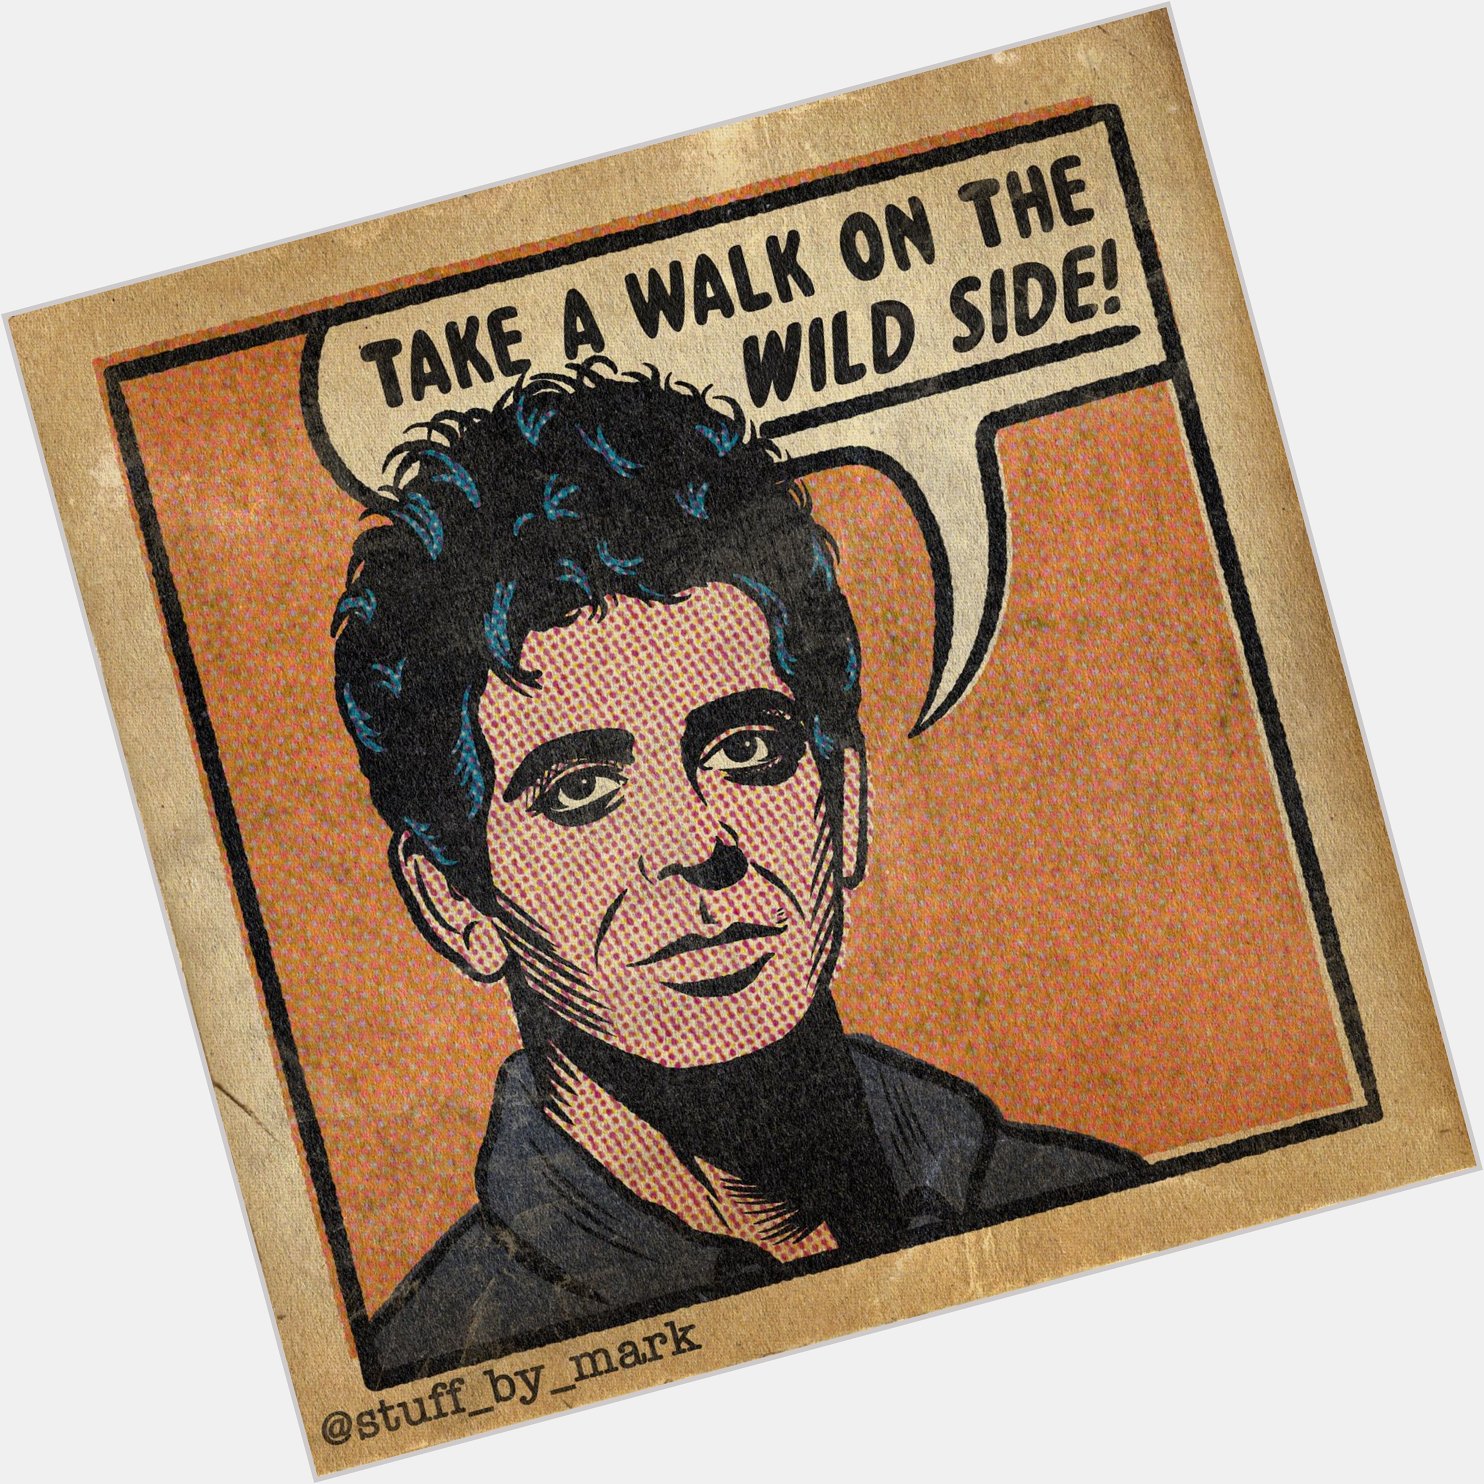 Happy belated Birthday Lou Reed. 